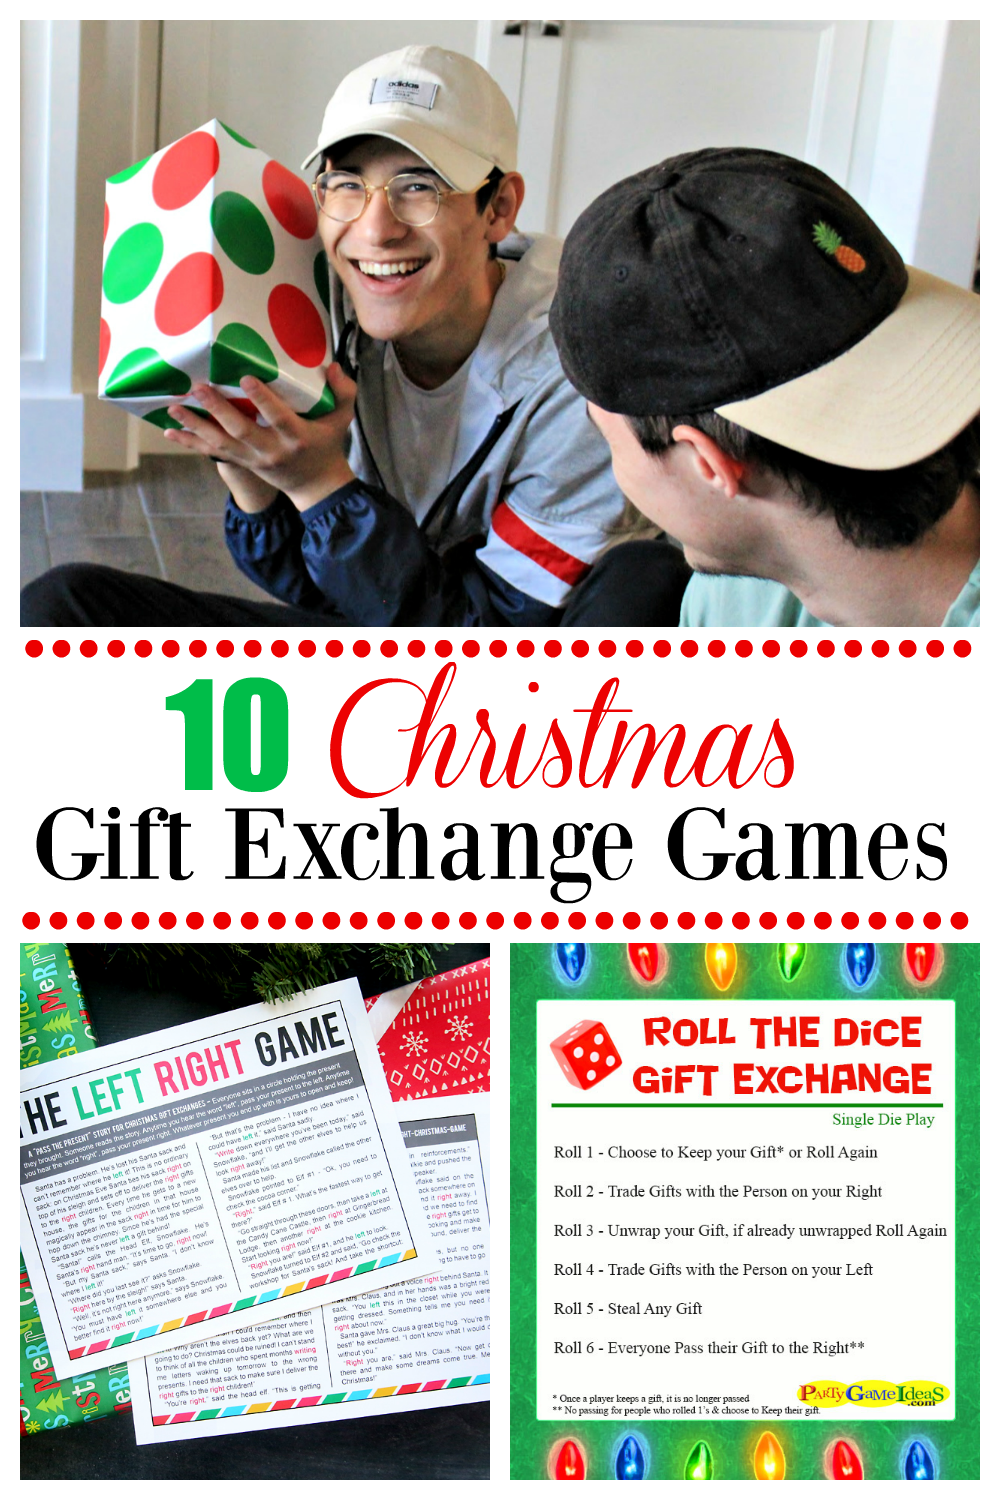 10 Christmas Gift Exchange Games. Fun Christmas party games perfect for all groups and ages. Fun Christmas games. #games #Christmasgames #funChristmaspartygames #partygames #giftexchange